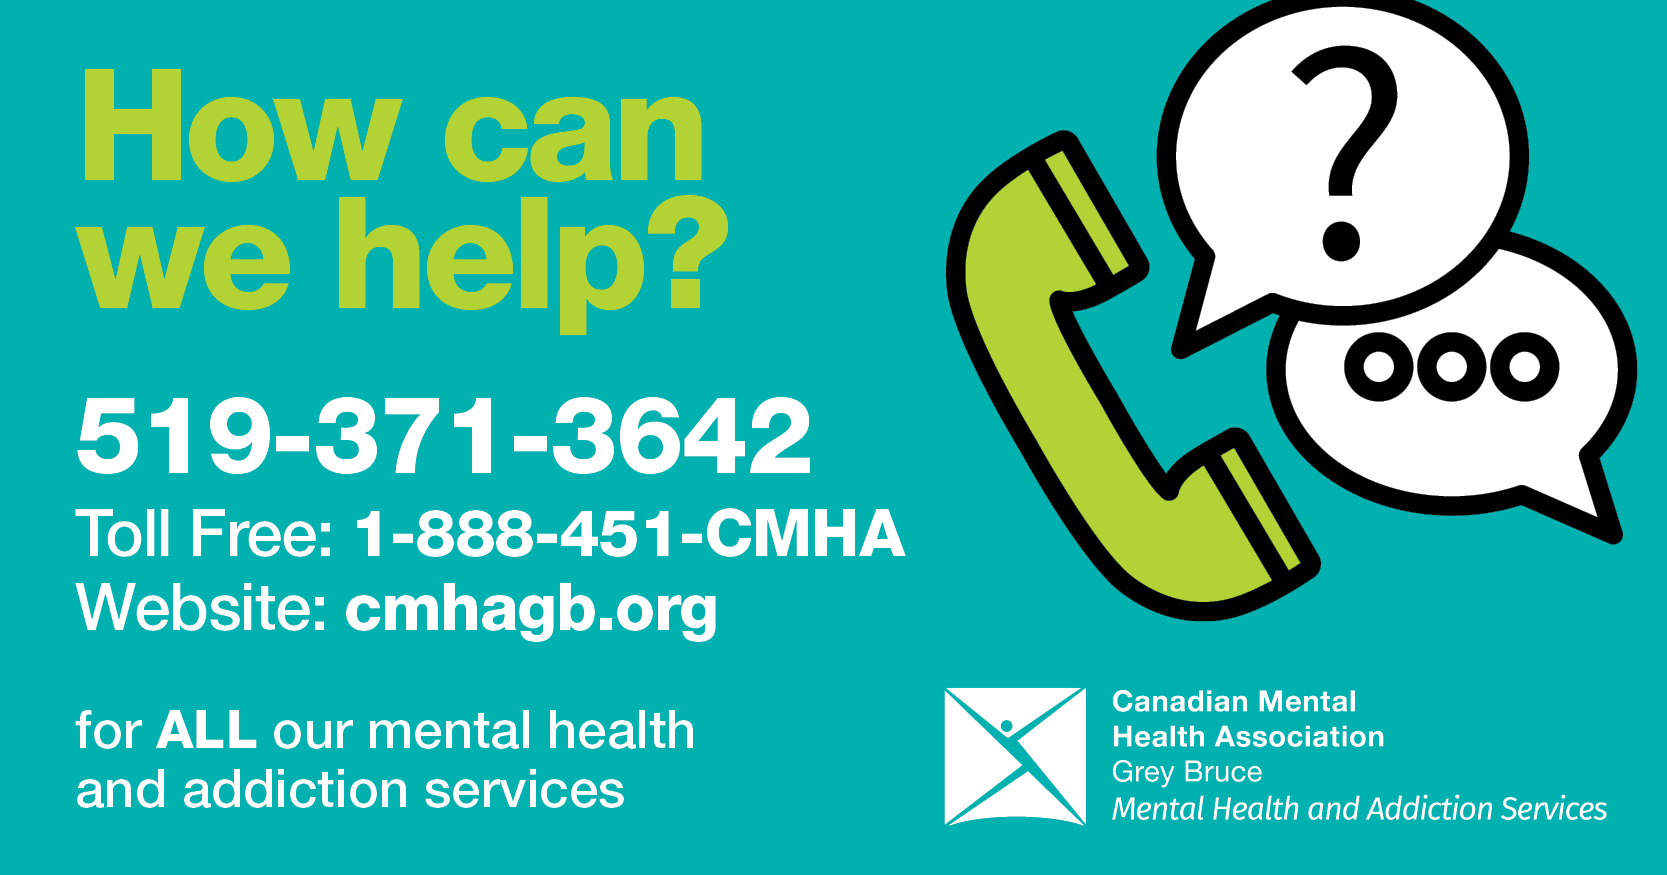 New easy access number unveiled for services by CMHA Grey Bruce